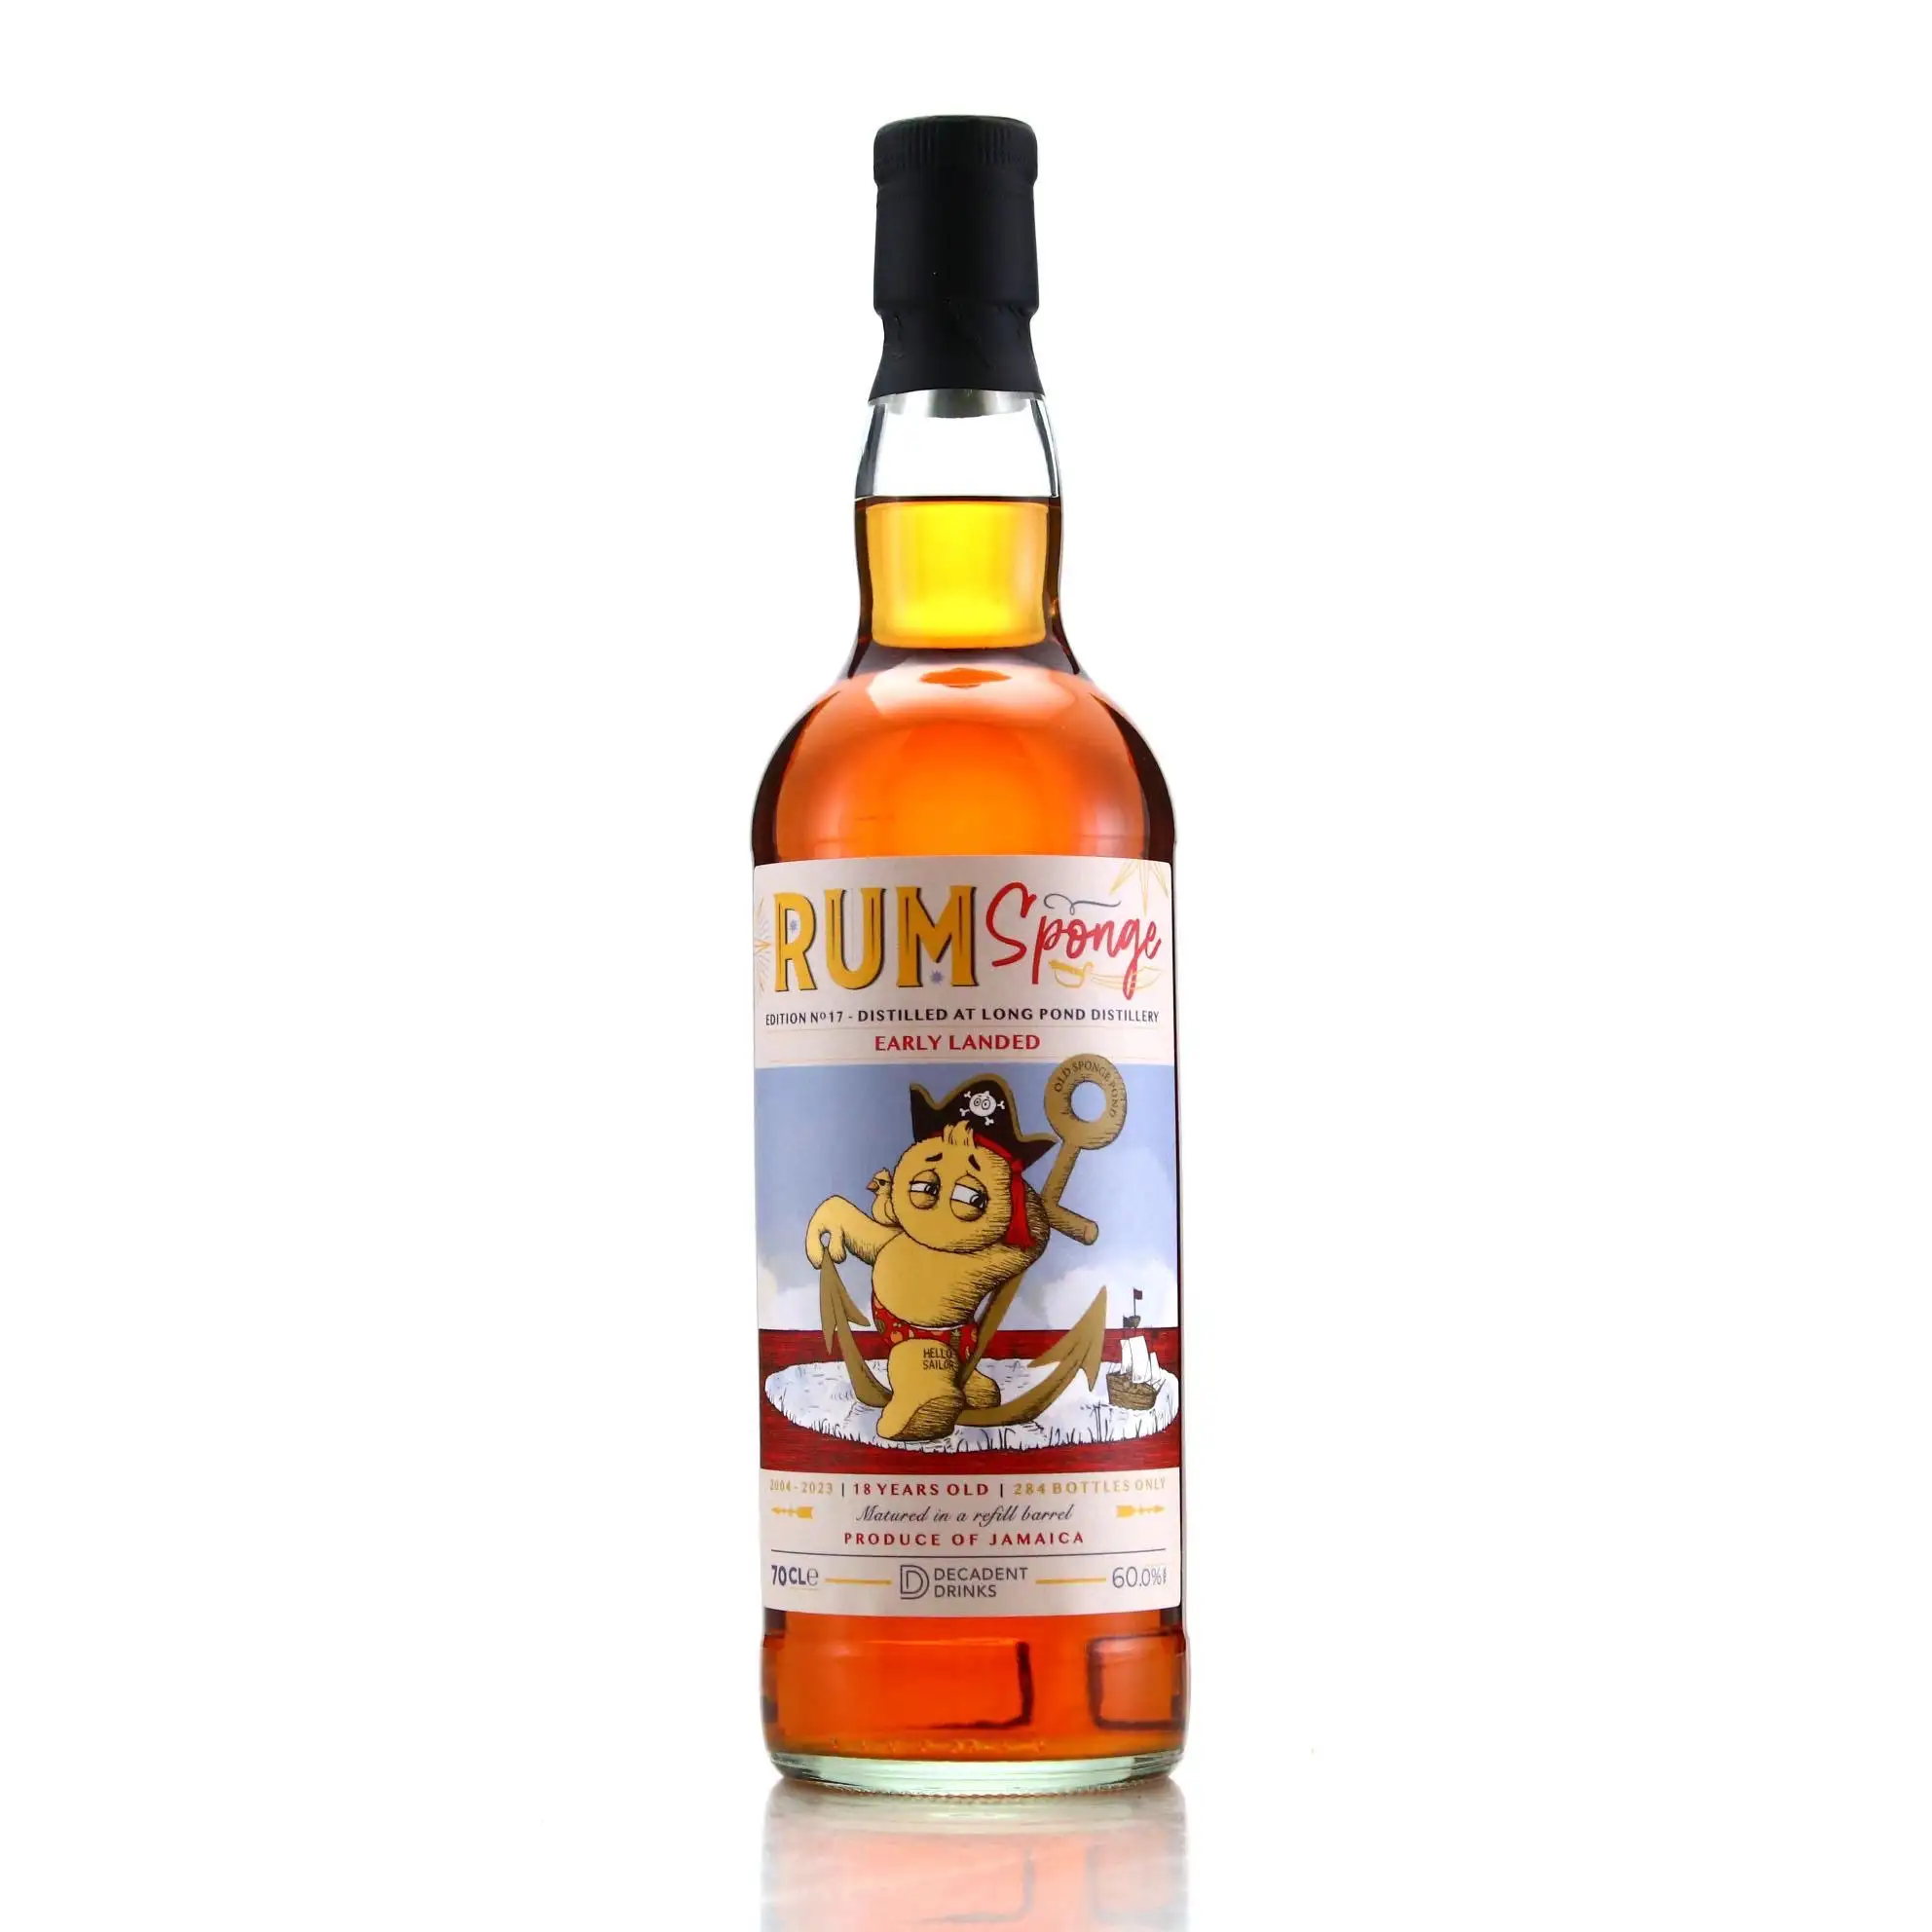 Image of the front of the bottle of the rum Rum Sponge No. 17 ITP